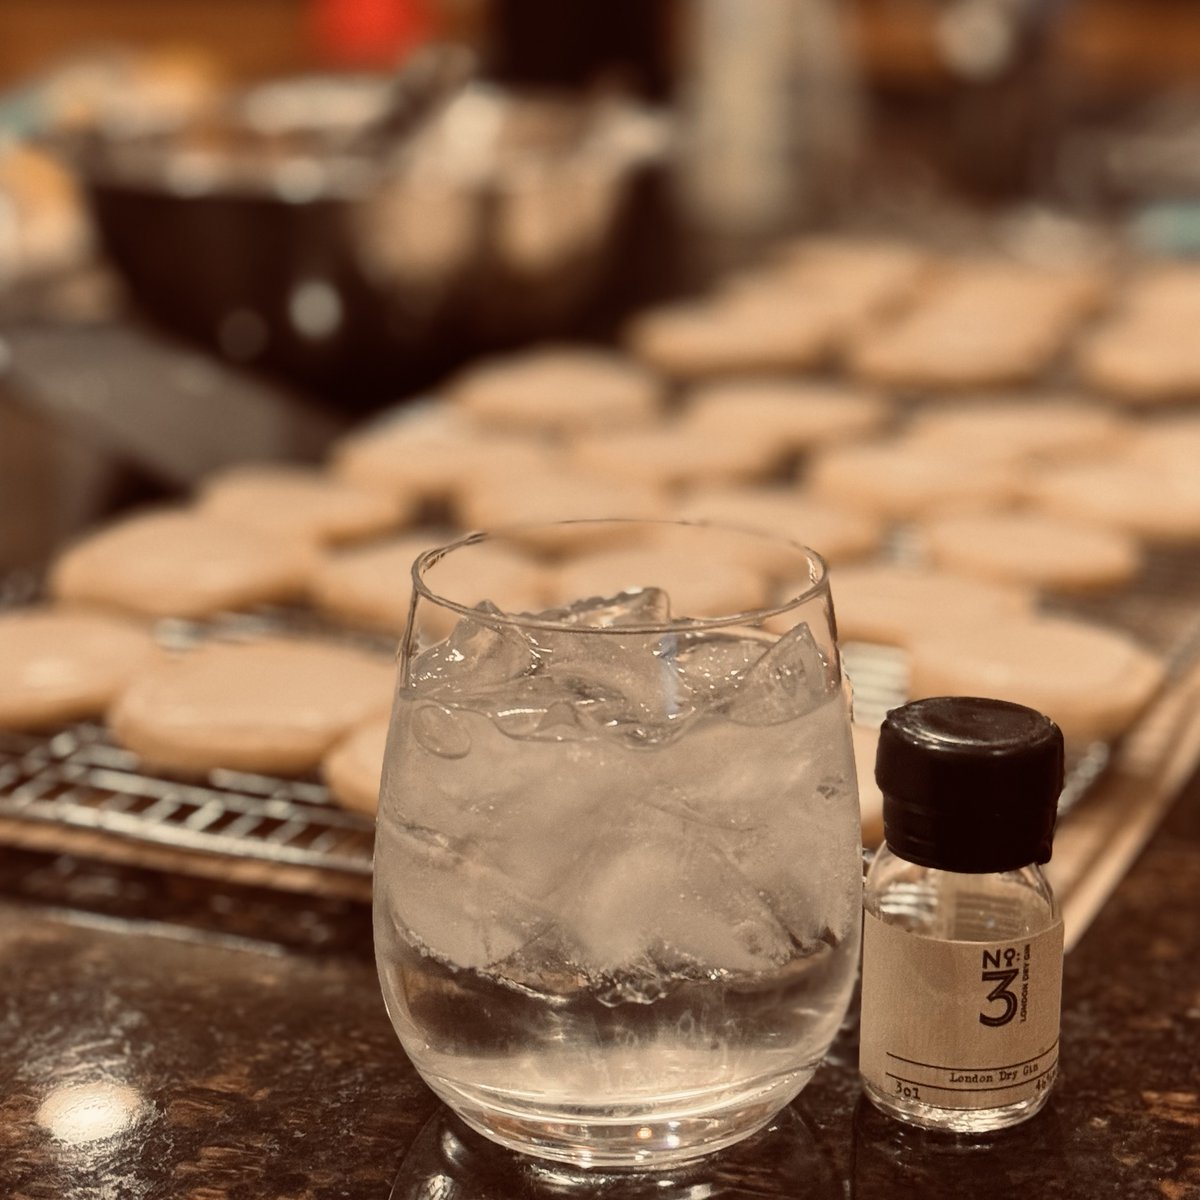 @SuntoryGlobal @Kyrodistillery @FeverTreeMixers Day 20 of #ginvent: No. 3 Gin by @No3Gin 

Really liked this one. Nice smooth flavor with a little extra (maybe the grapefruit & orange peel botanicals?) that stands out from other gins I've had in the last 20 days. Will need to try again the next time I have a chance.